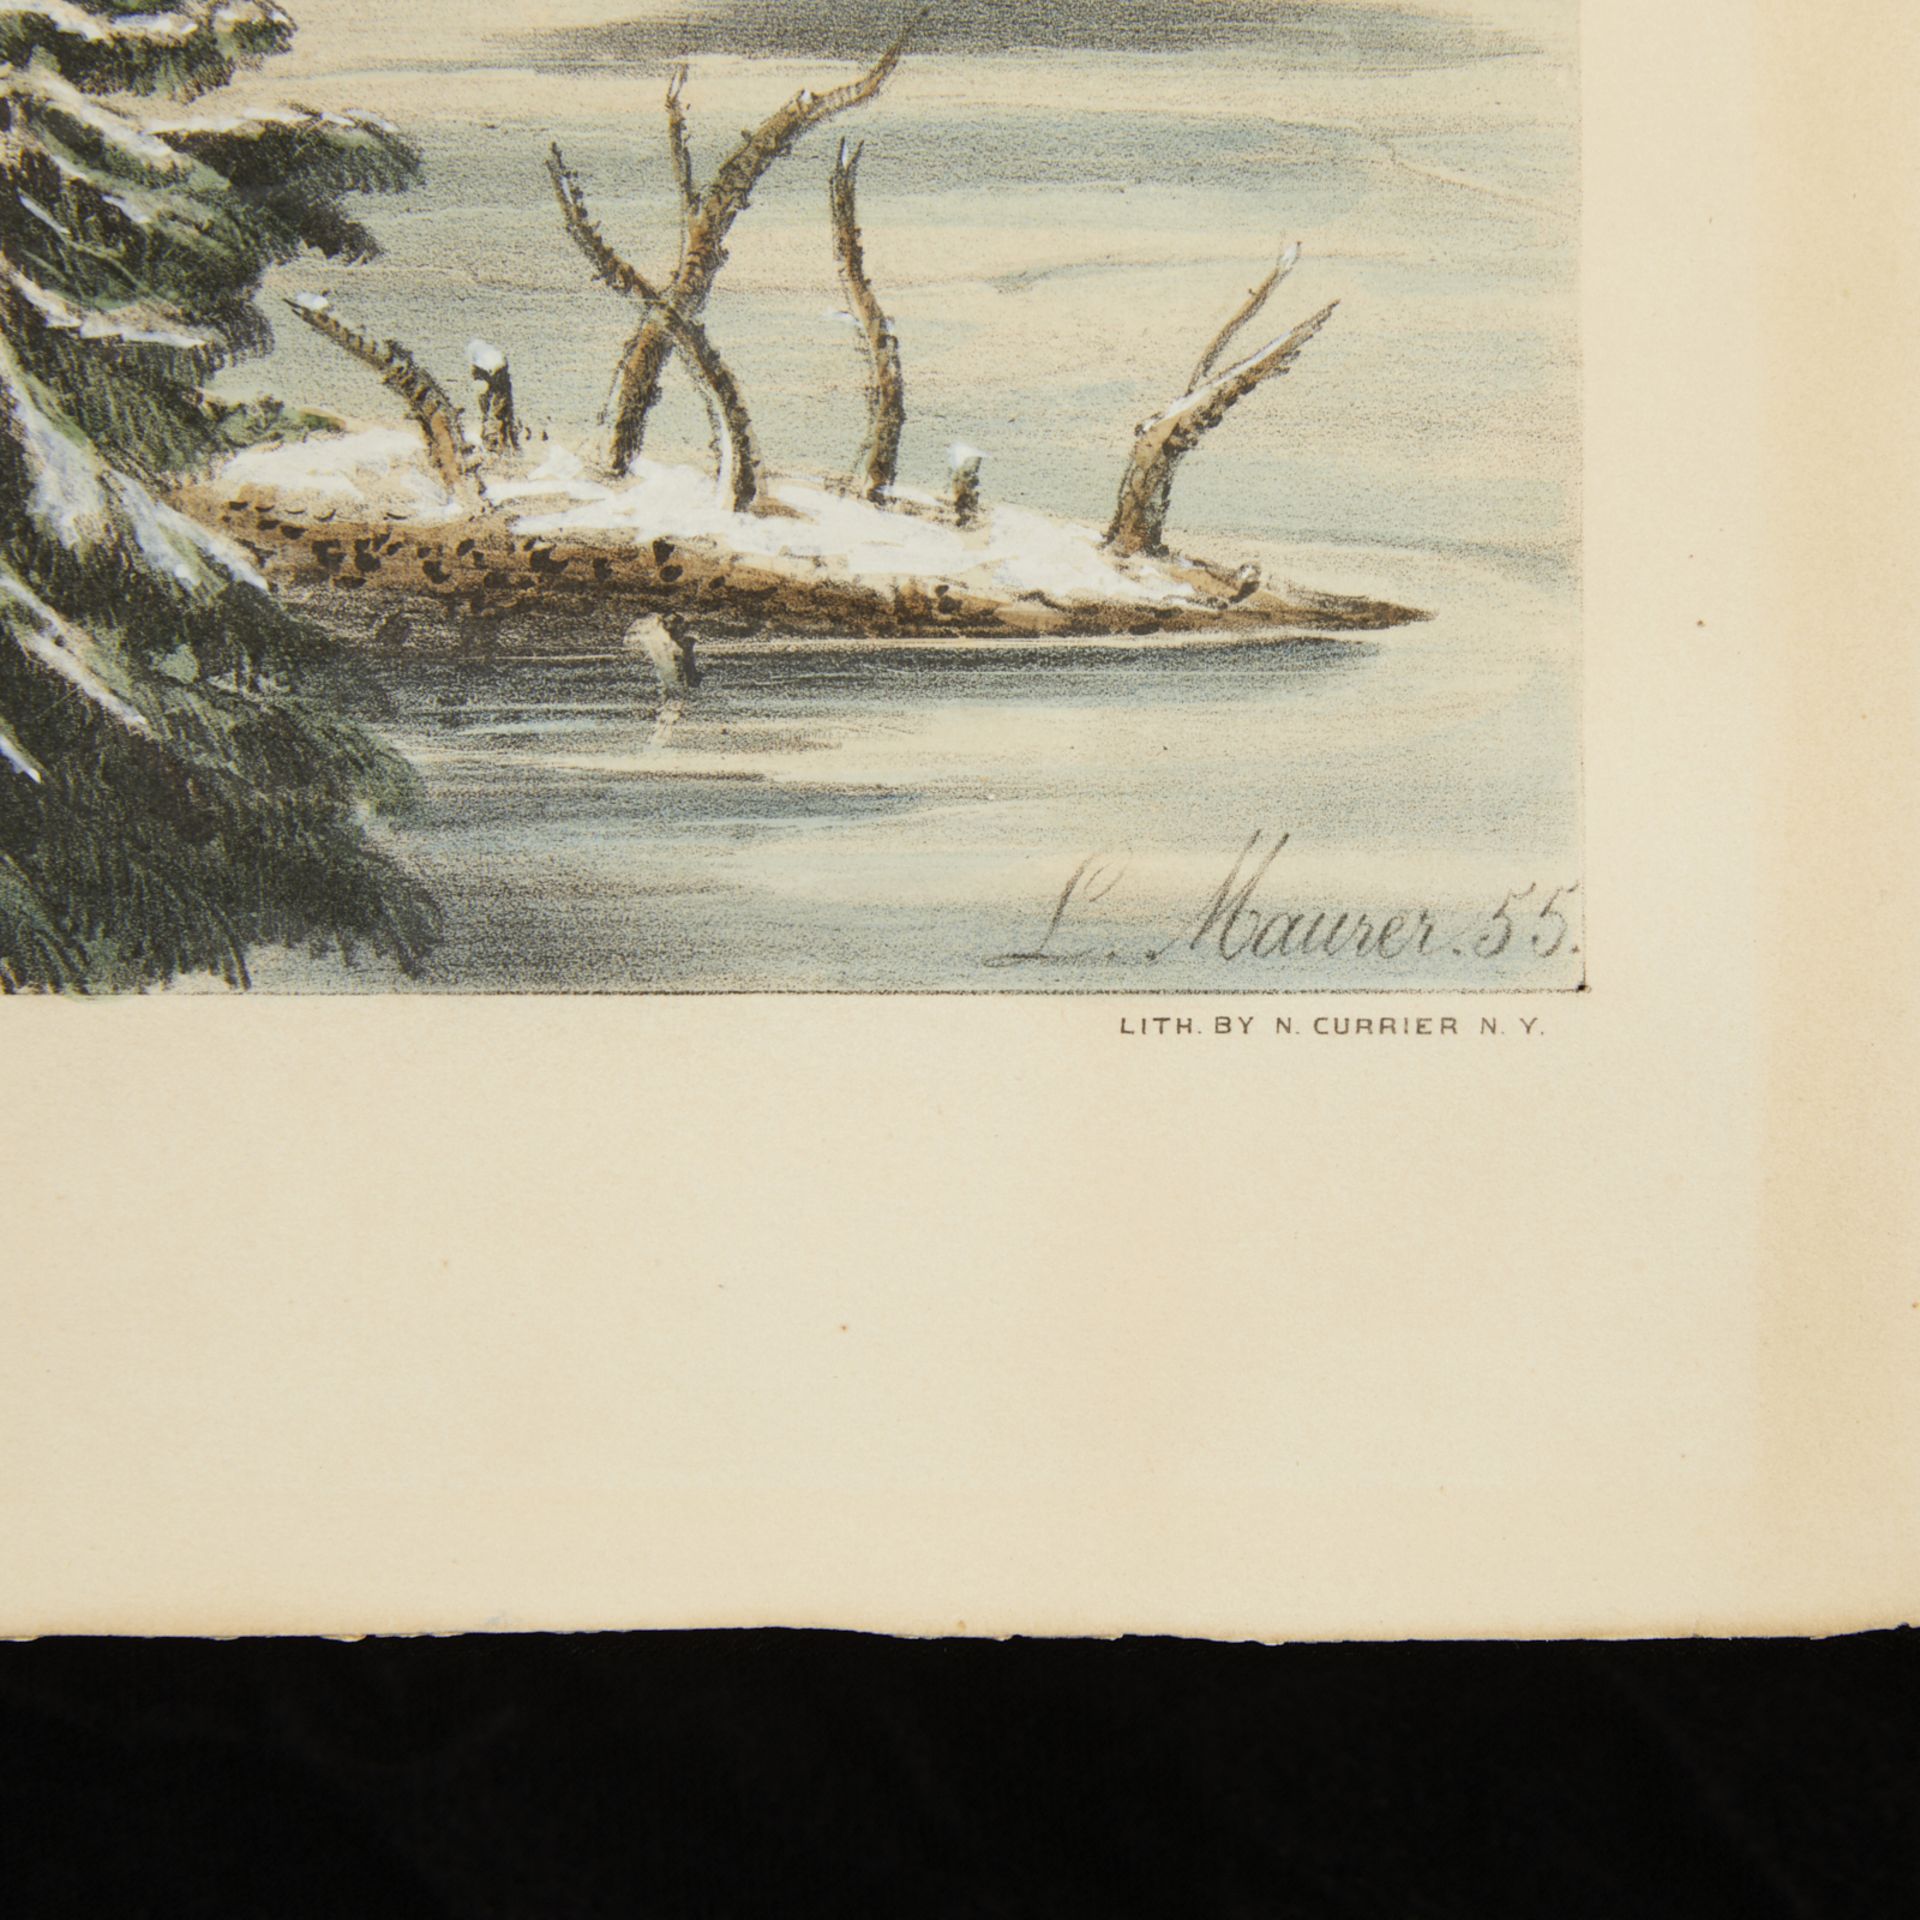 Currier & Ives "Am. Winter Sports: Deer Shooting" - Image 5 of 8